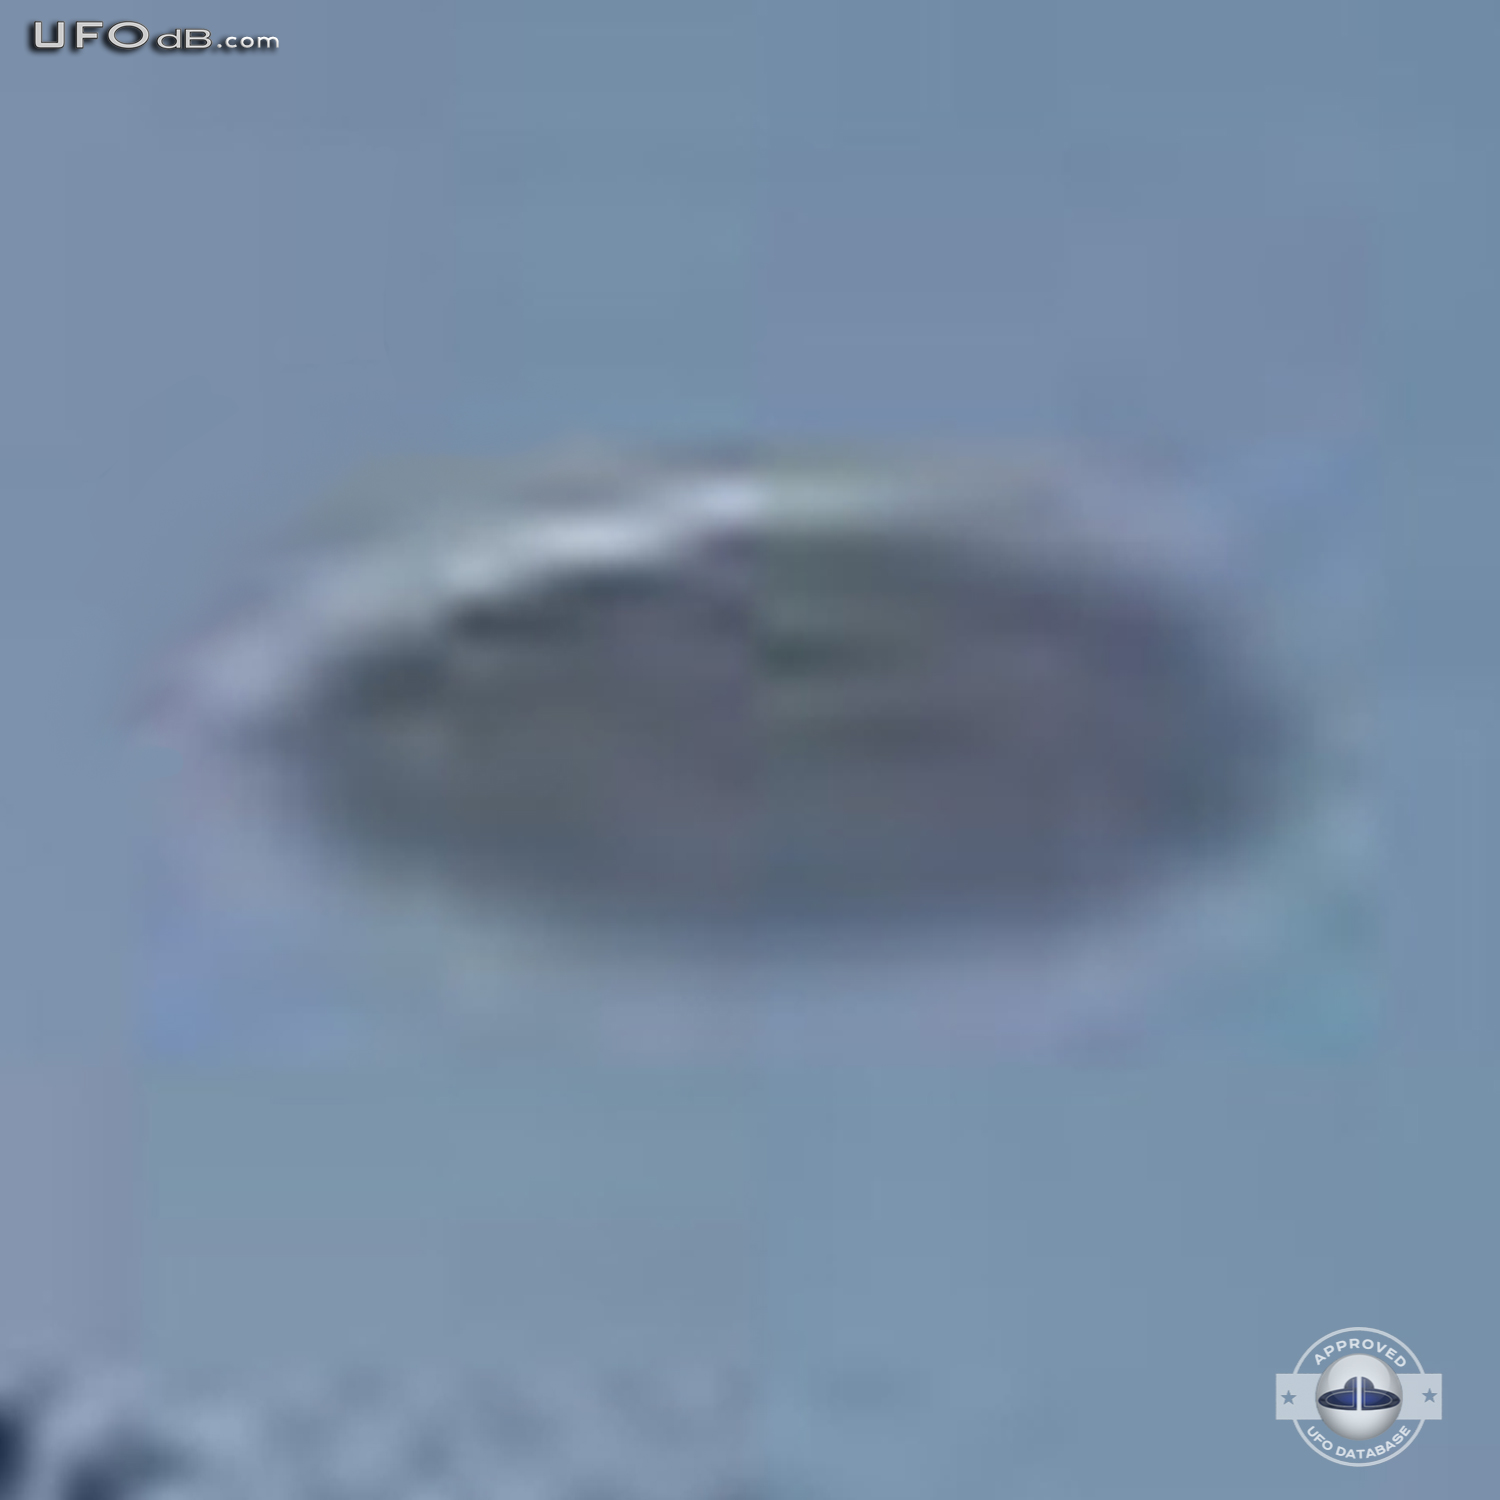 In Vestal New York a witness sees a UFO as large as a Football Stadium UFO Picture #363-4